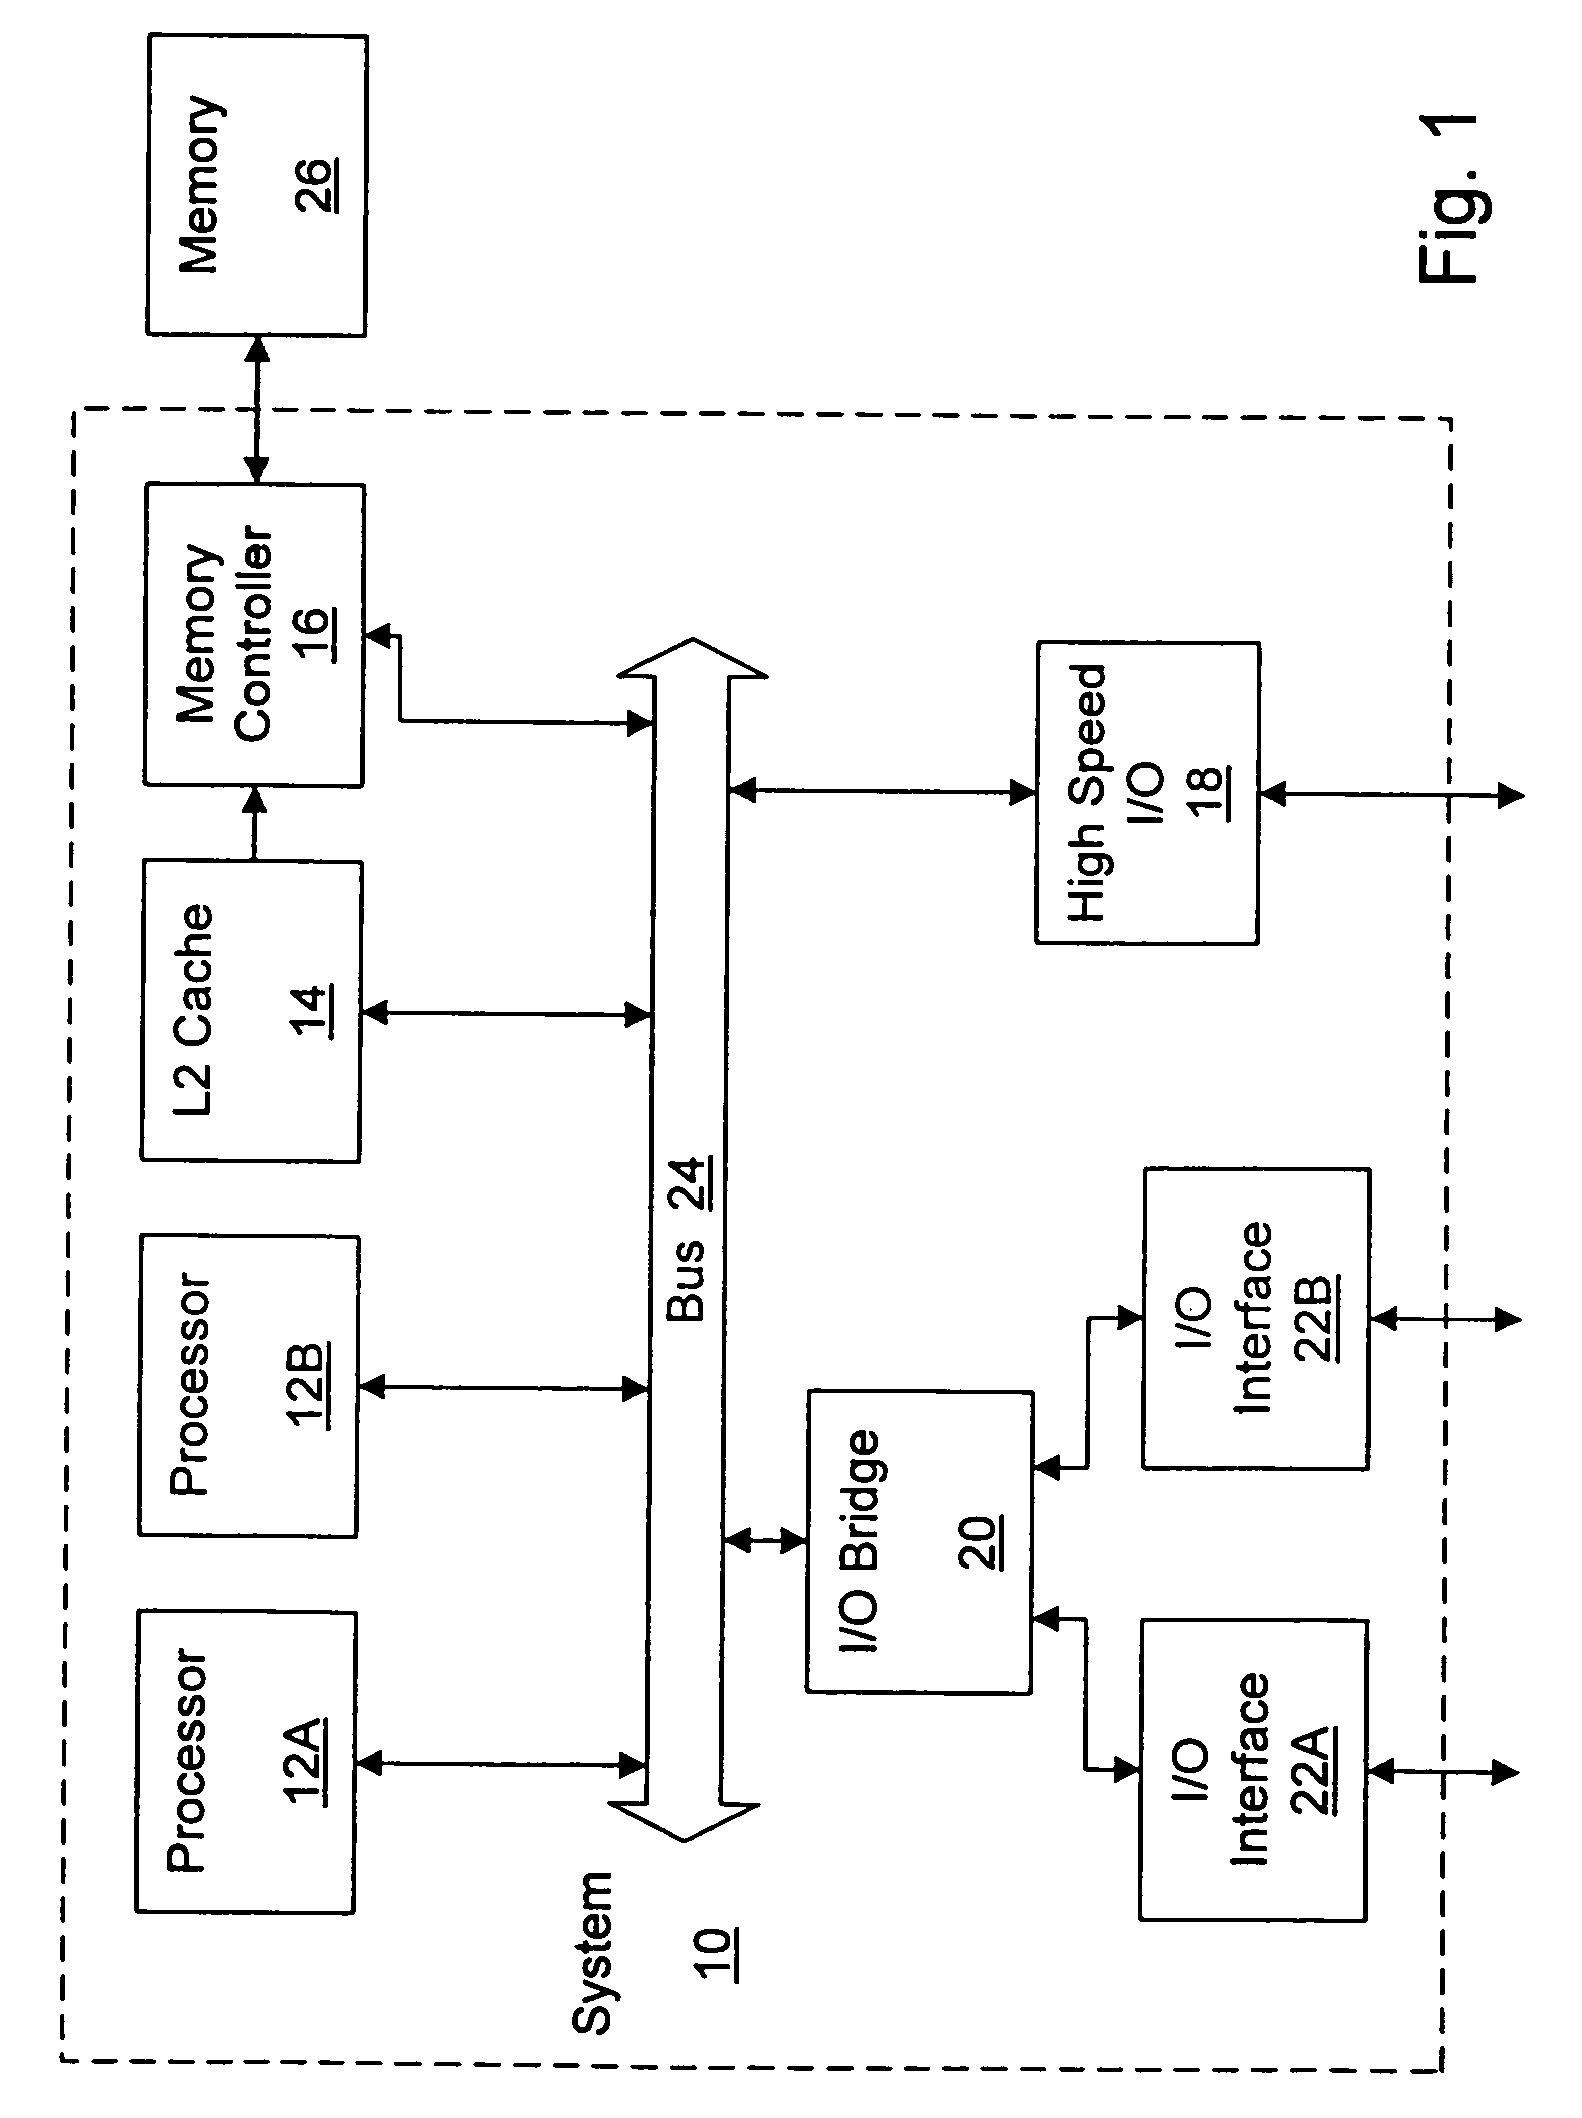 Direct access mode for a cache